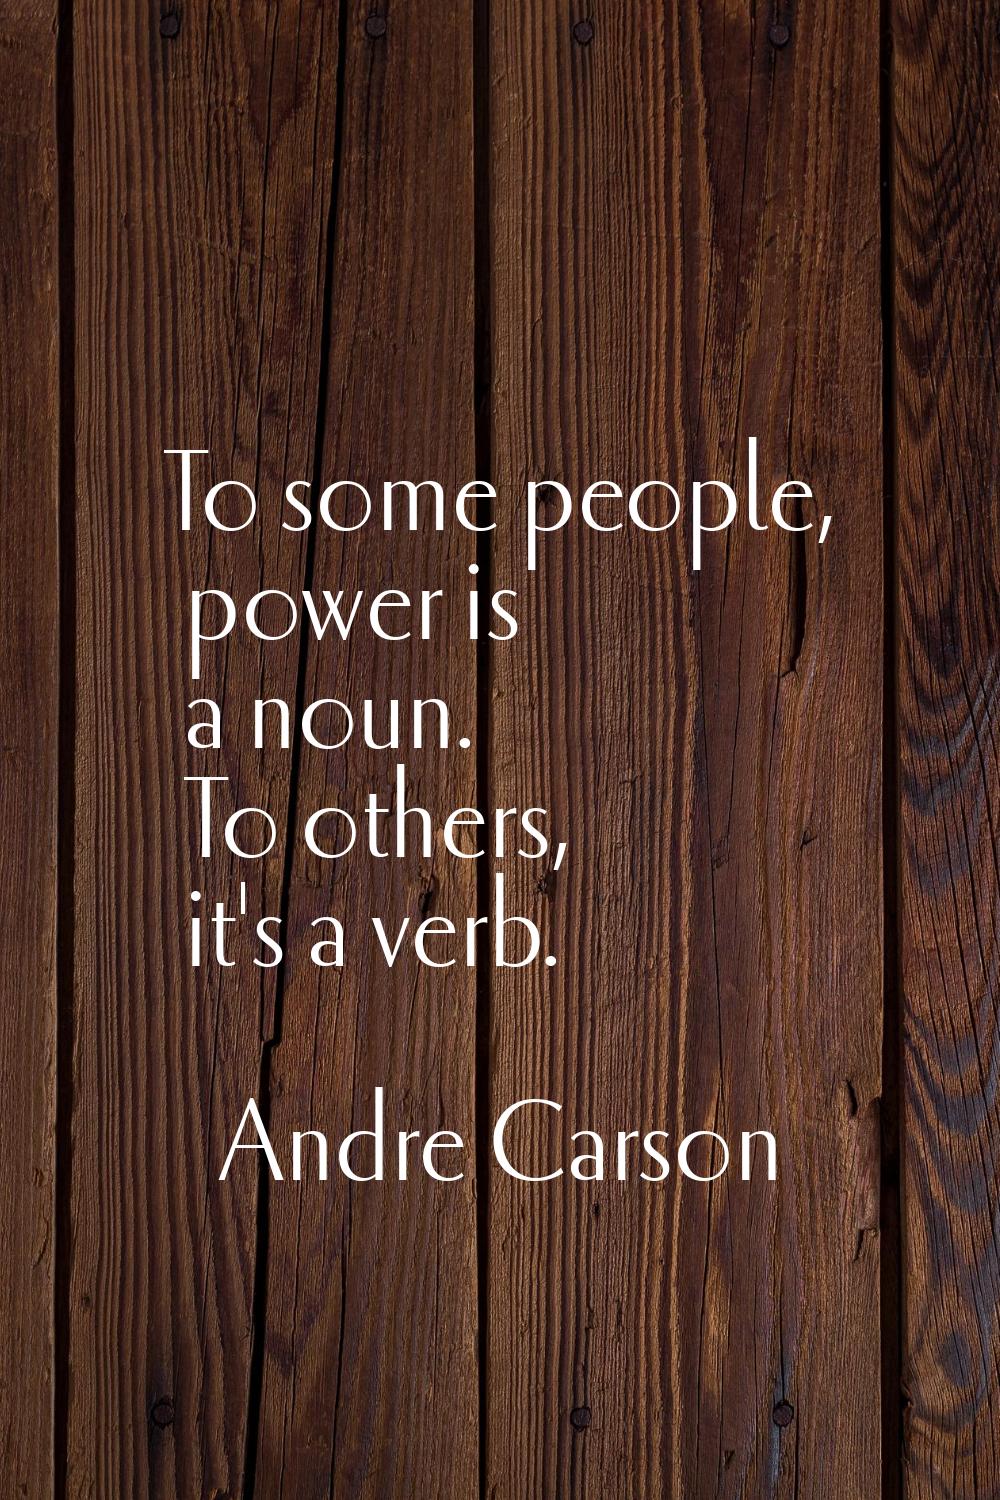 To some people, power is a noun. To others, it's a verb.